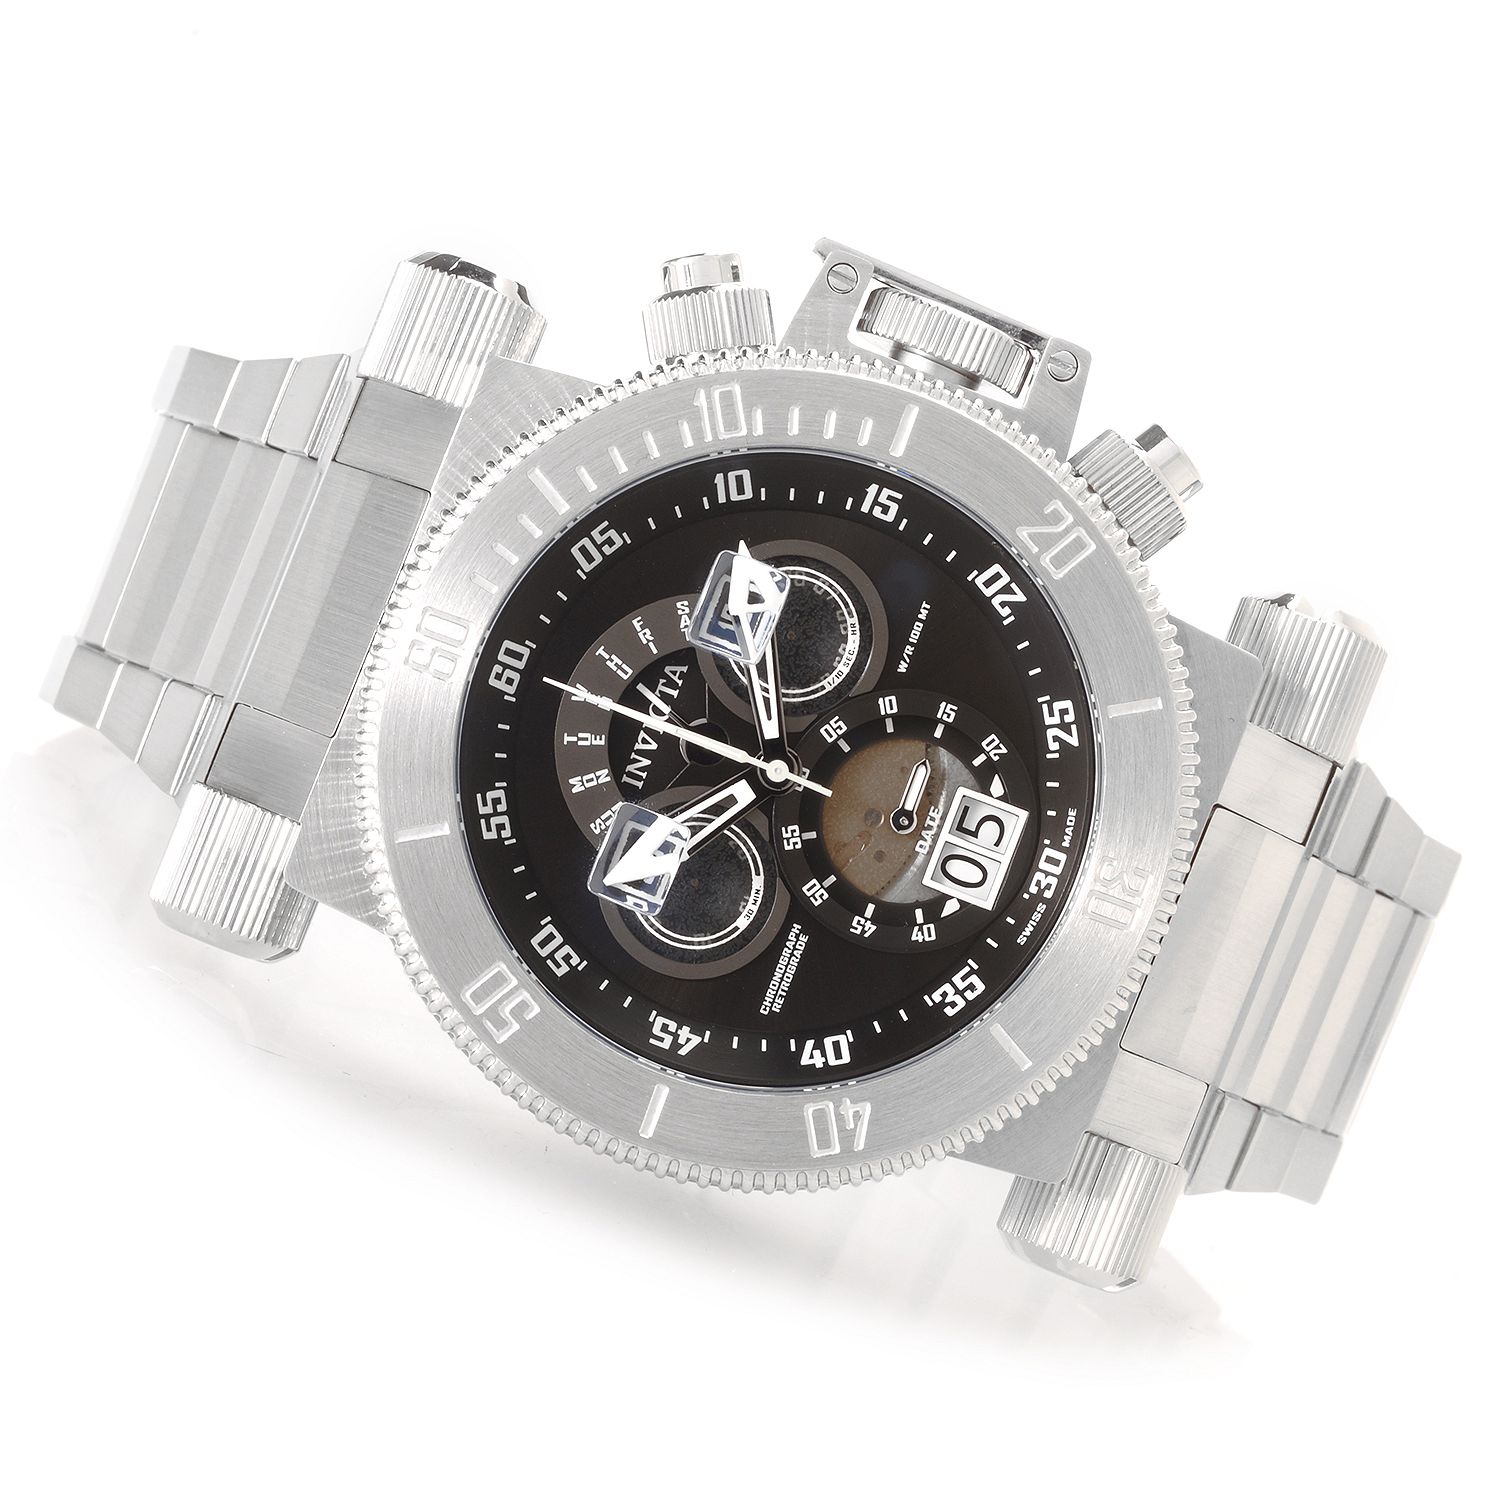 96 - Invicta 51mm Coalition Forces Swiss Made Quartz Chronograph Stainless Steel Bracelet Watch